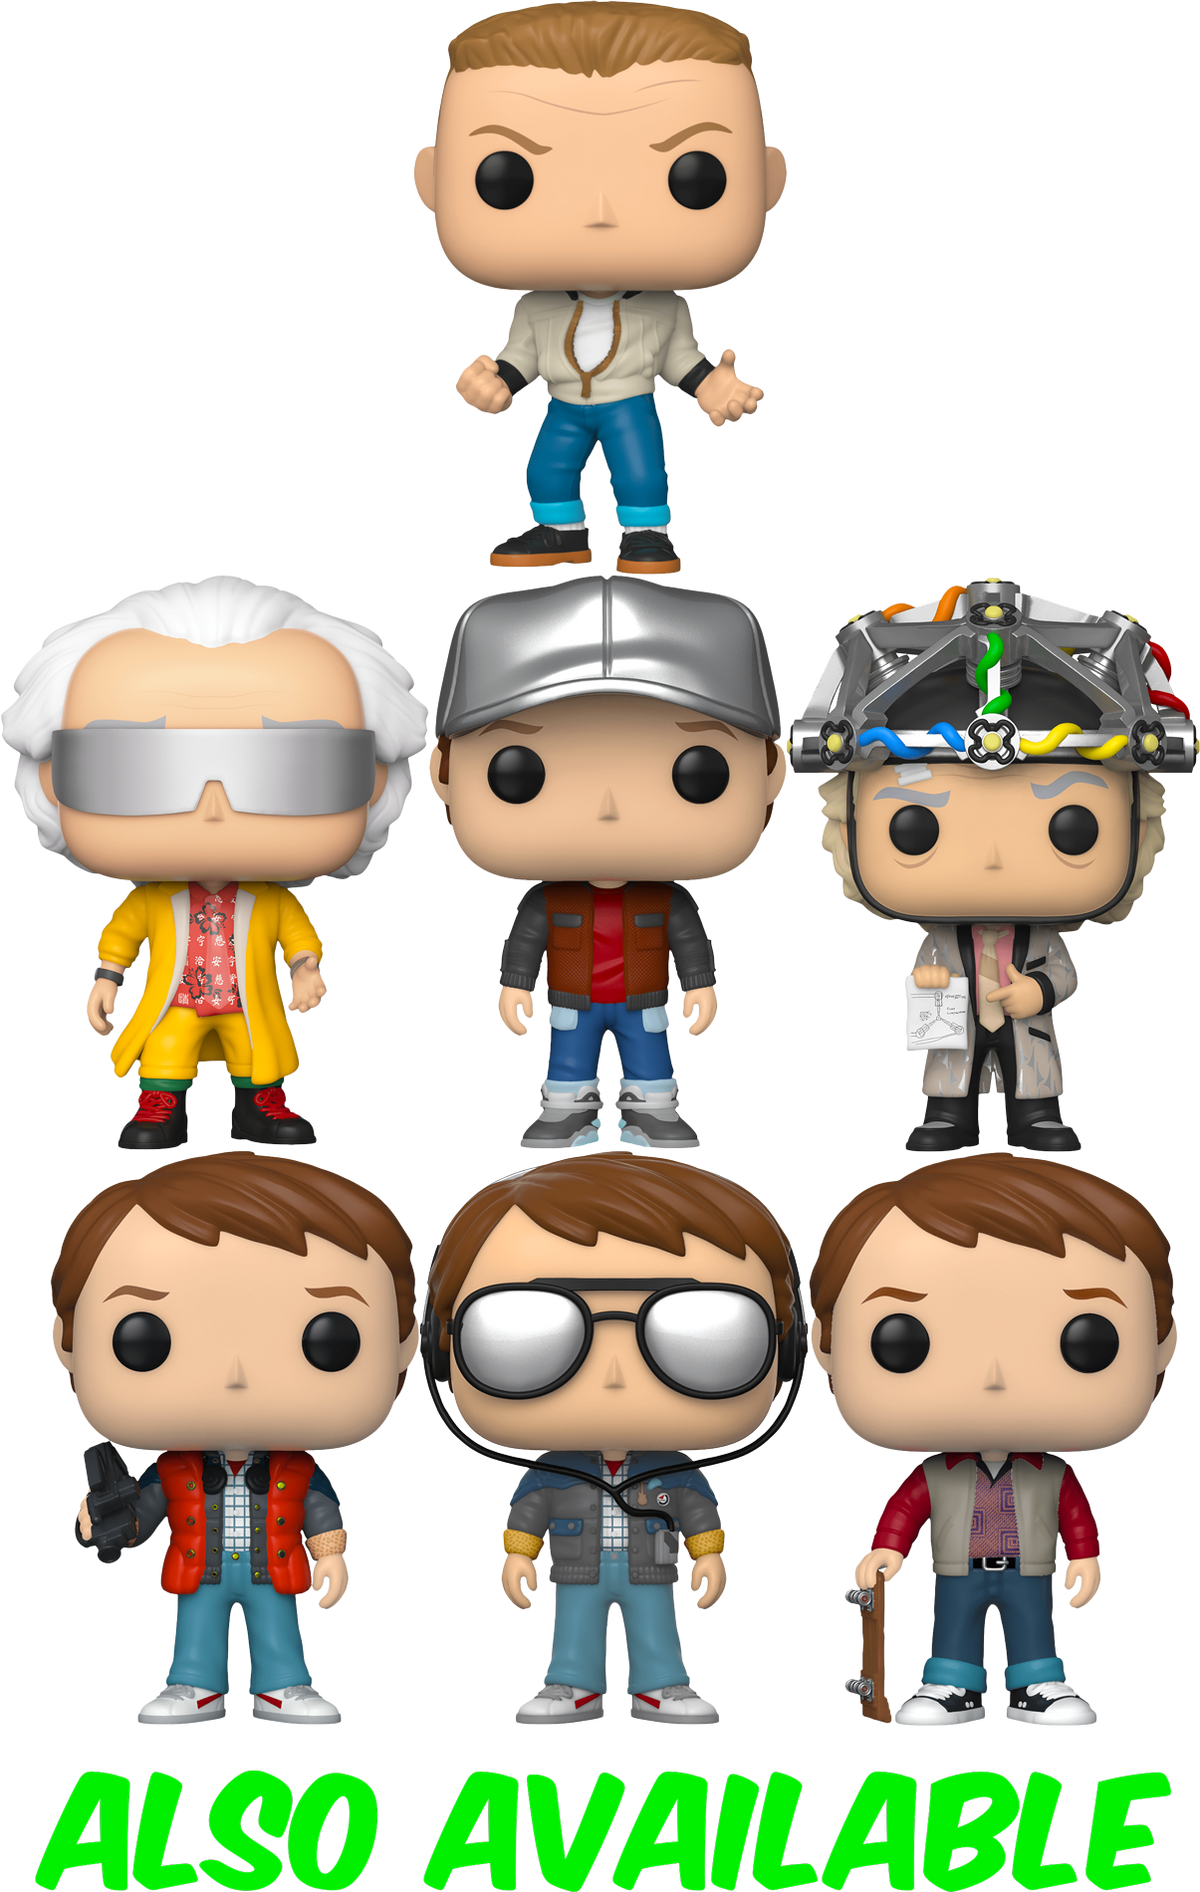 Funko Pop! Back To The Future - Dr. Emmett Brown with Helmet #959 - The Amazing Collectables